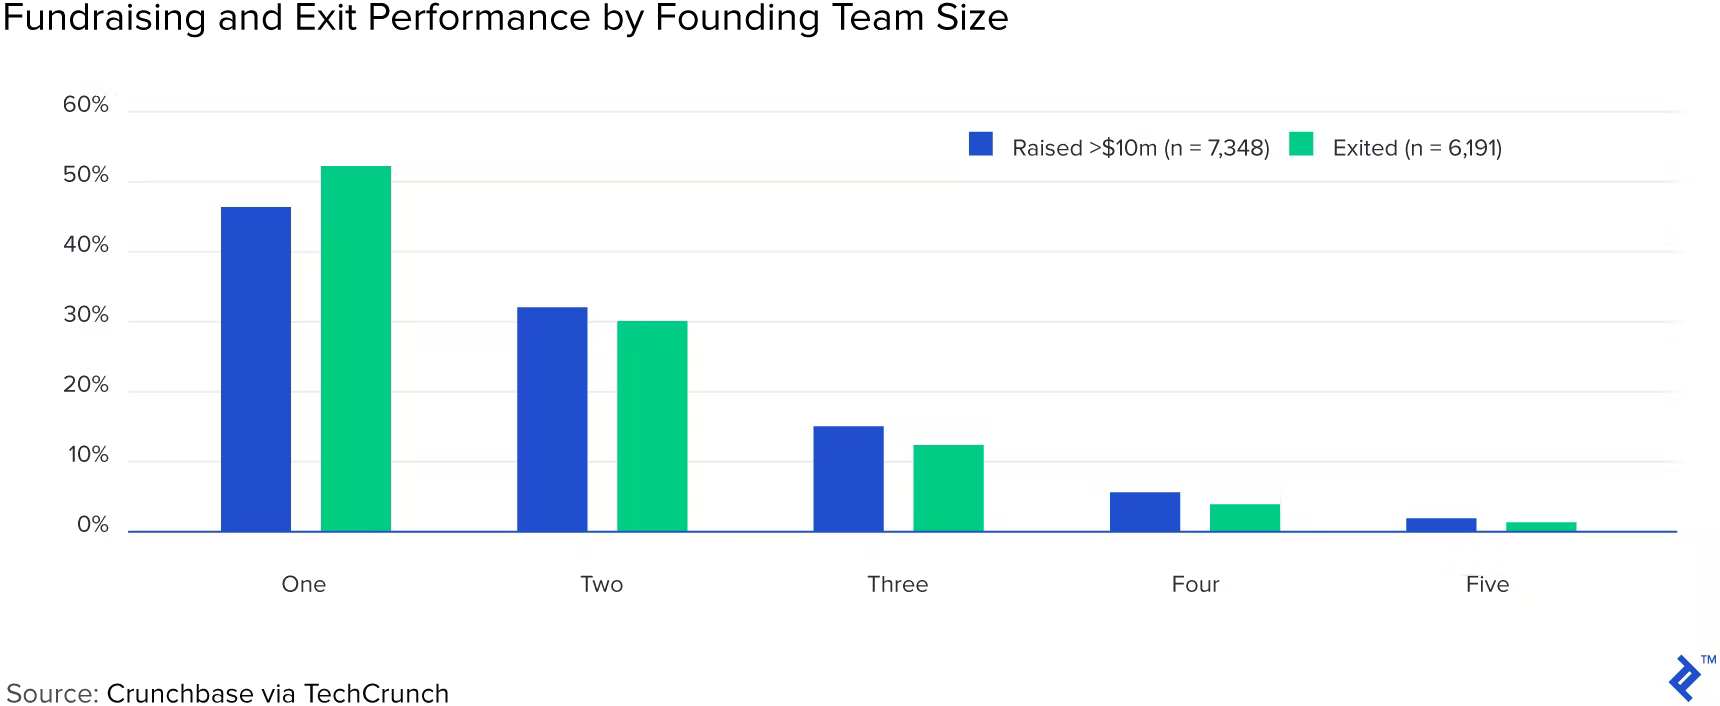 Fundraising an exit performance by founding team size